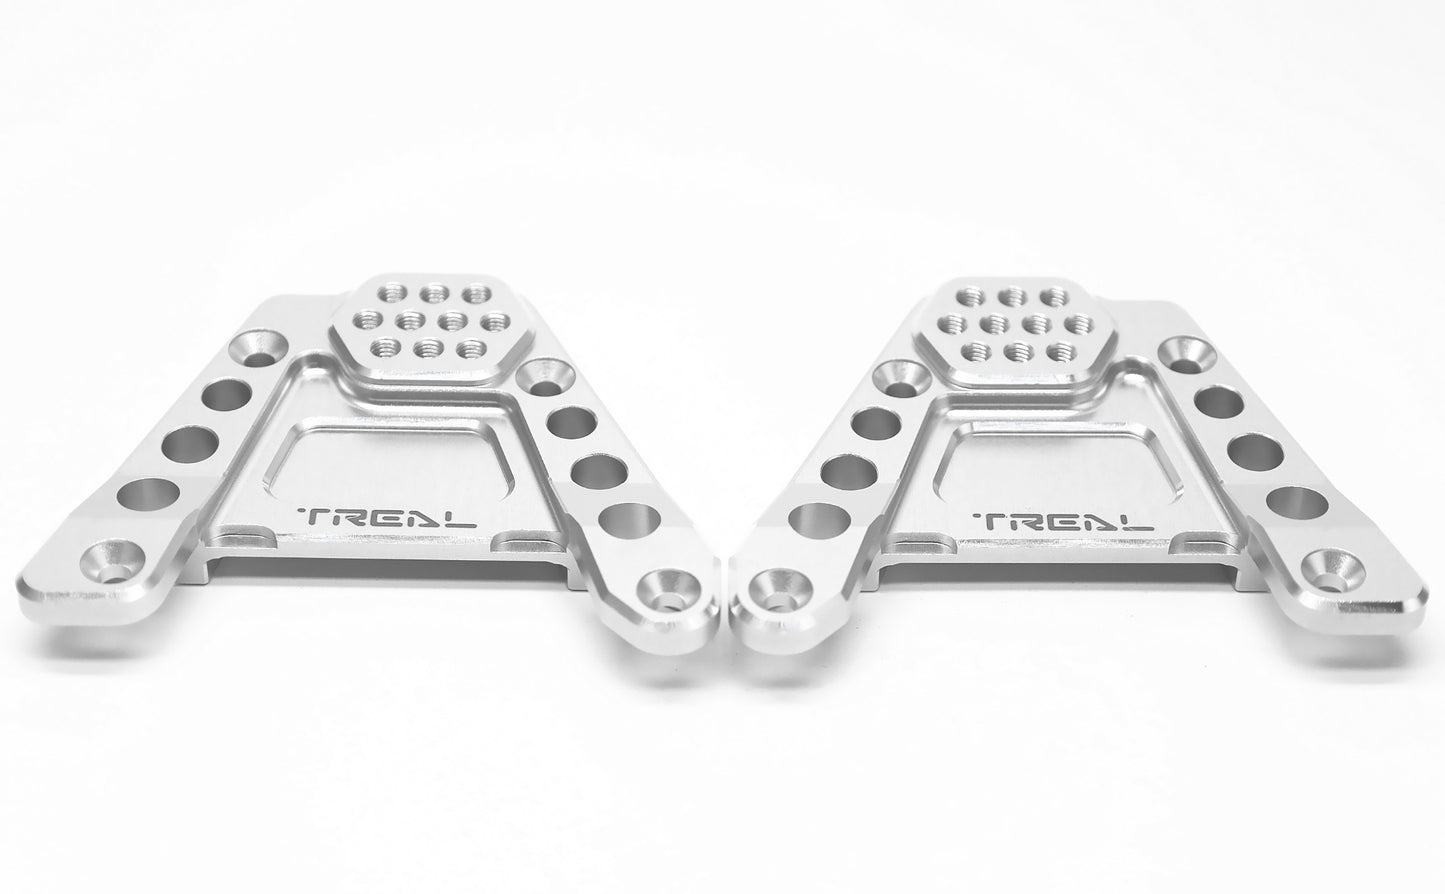 TREAL CNC Aluminum 7075 Rear Shock Towers for SCX6, Left/Right (2) pcs Hoops Bracket Mount Upgrades for 1/6 Axial SCX6